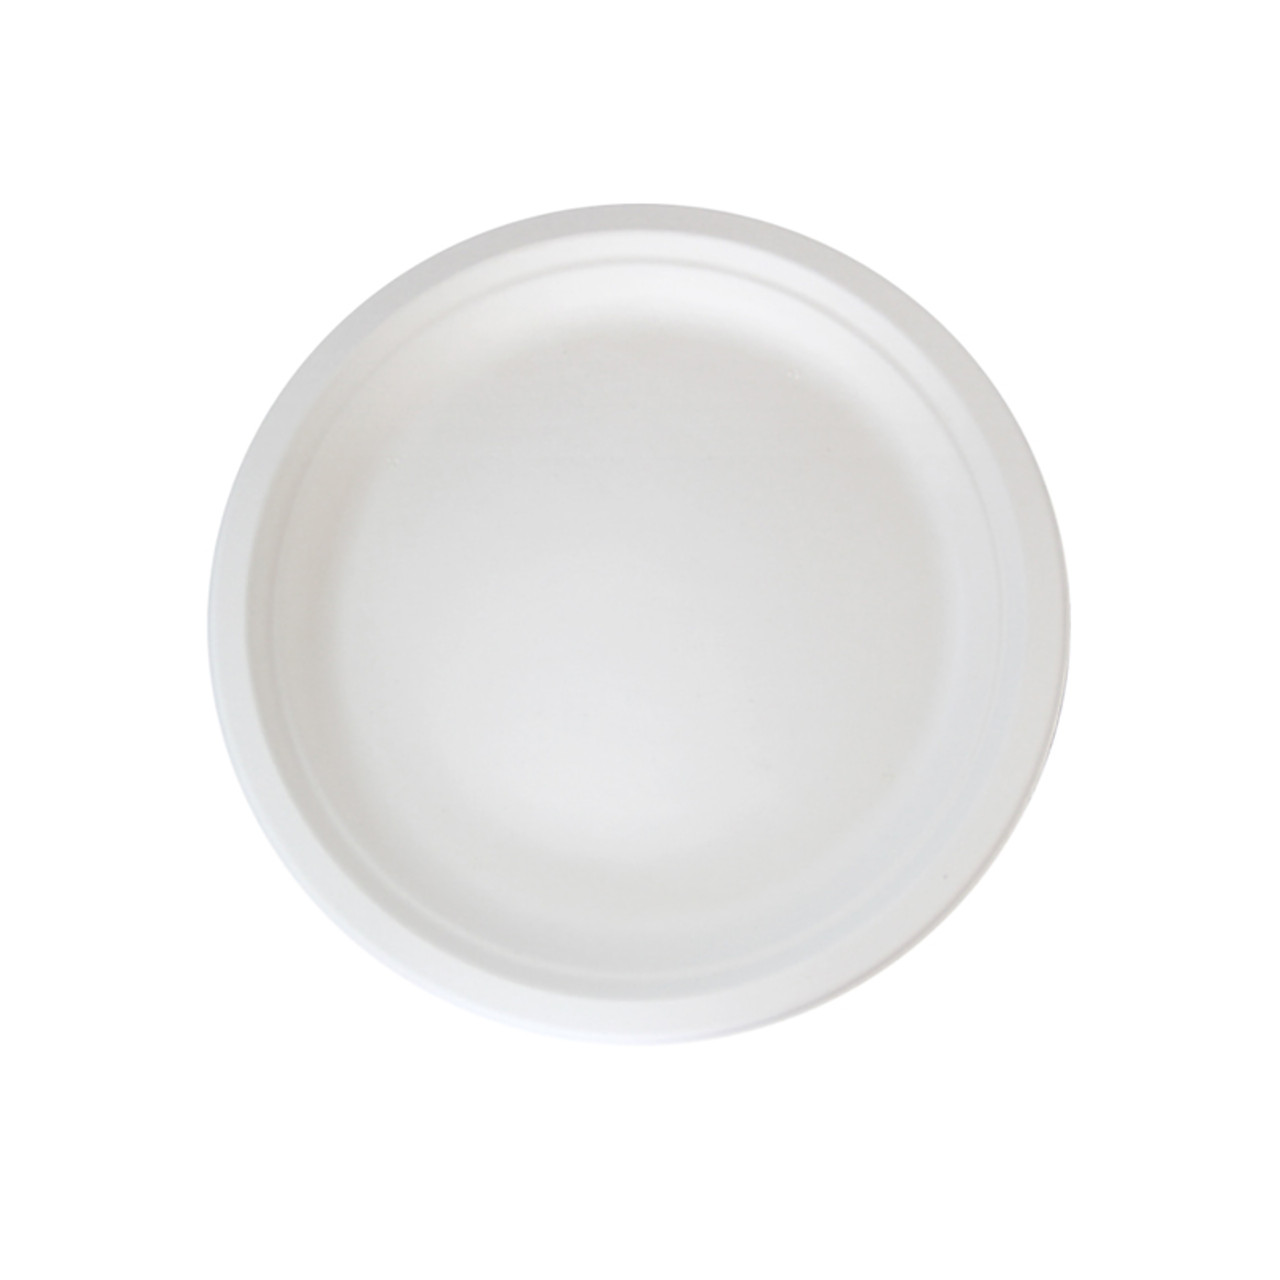 Order a Sample - Sugarcane White Round Plate Dia:7in H:.6in